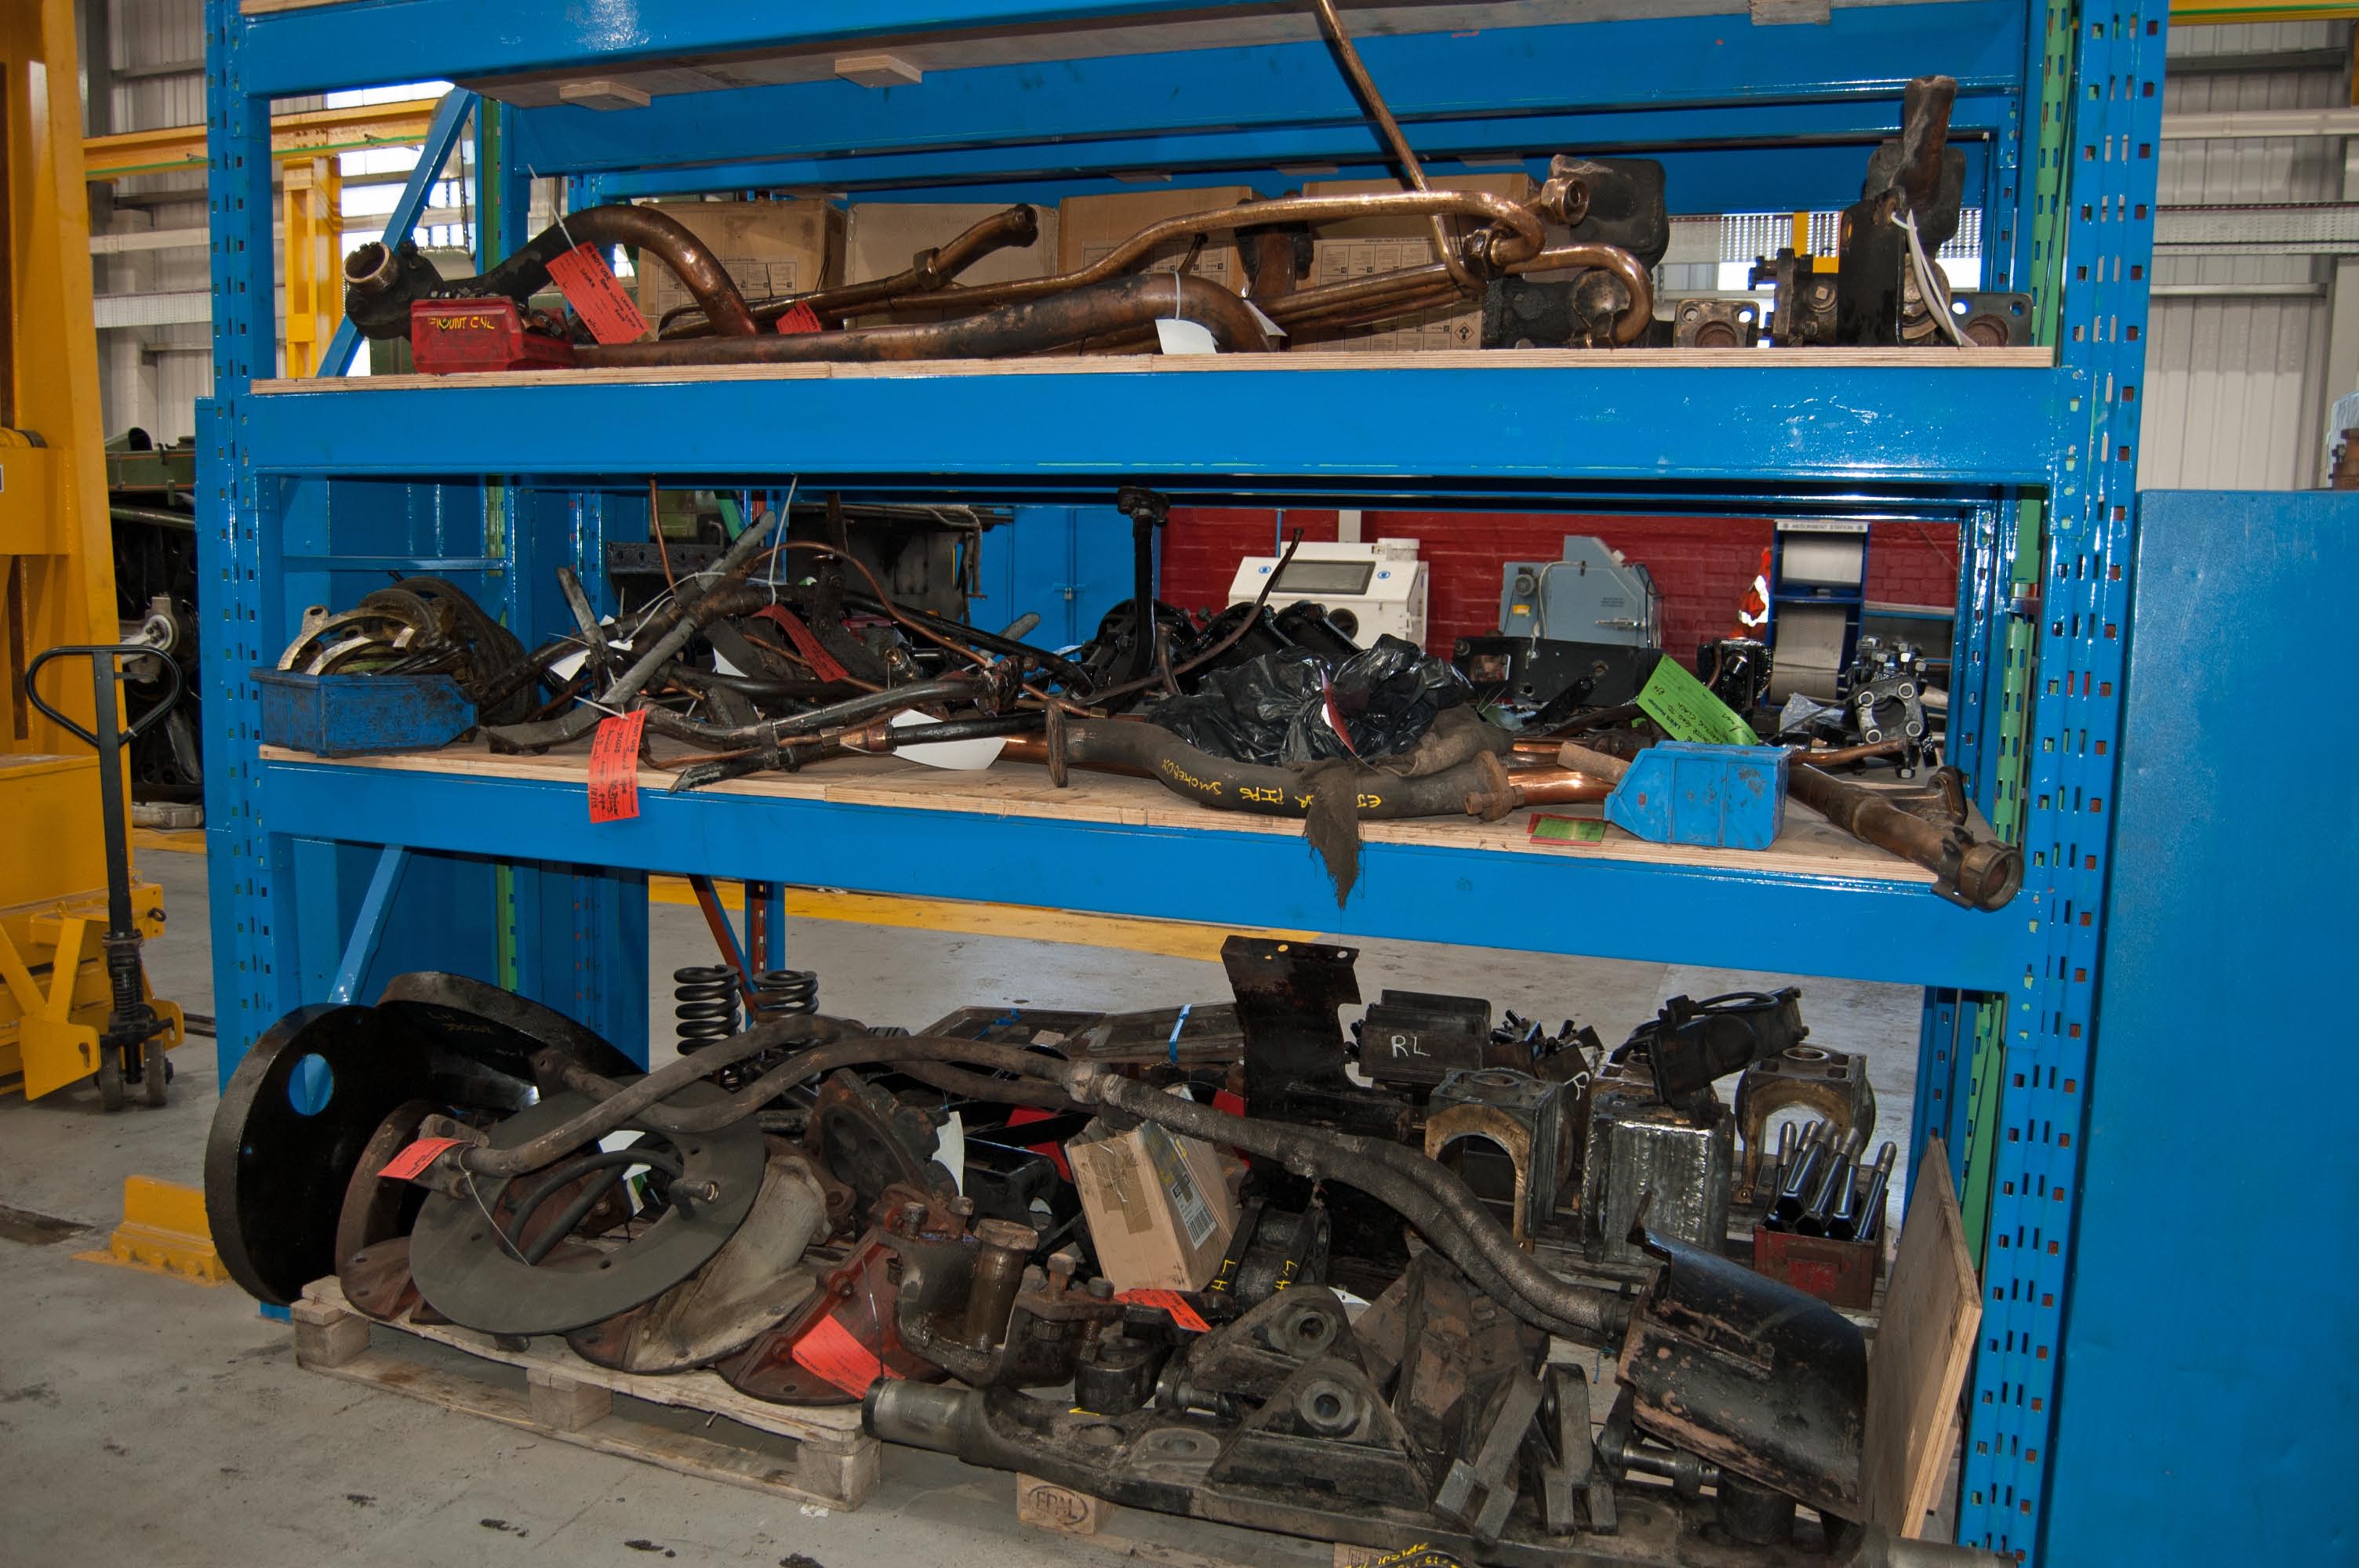 Lots of the smaller bits that have been taken off the locomotive. How many can you identify?